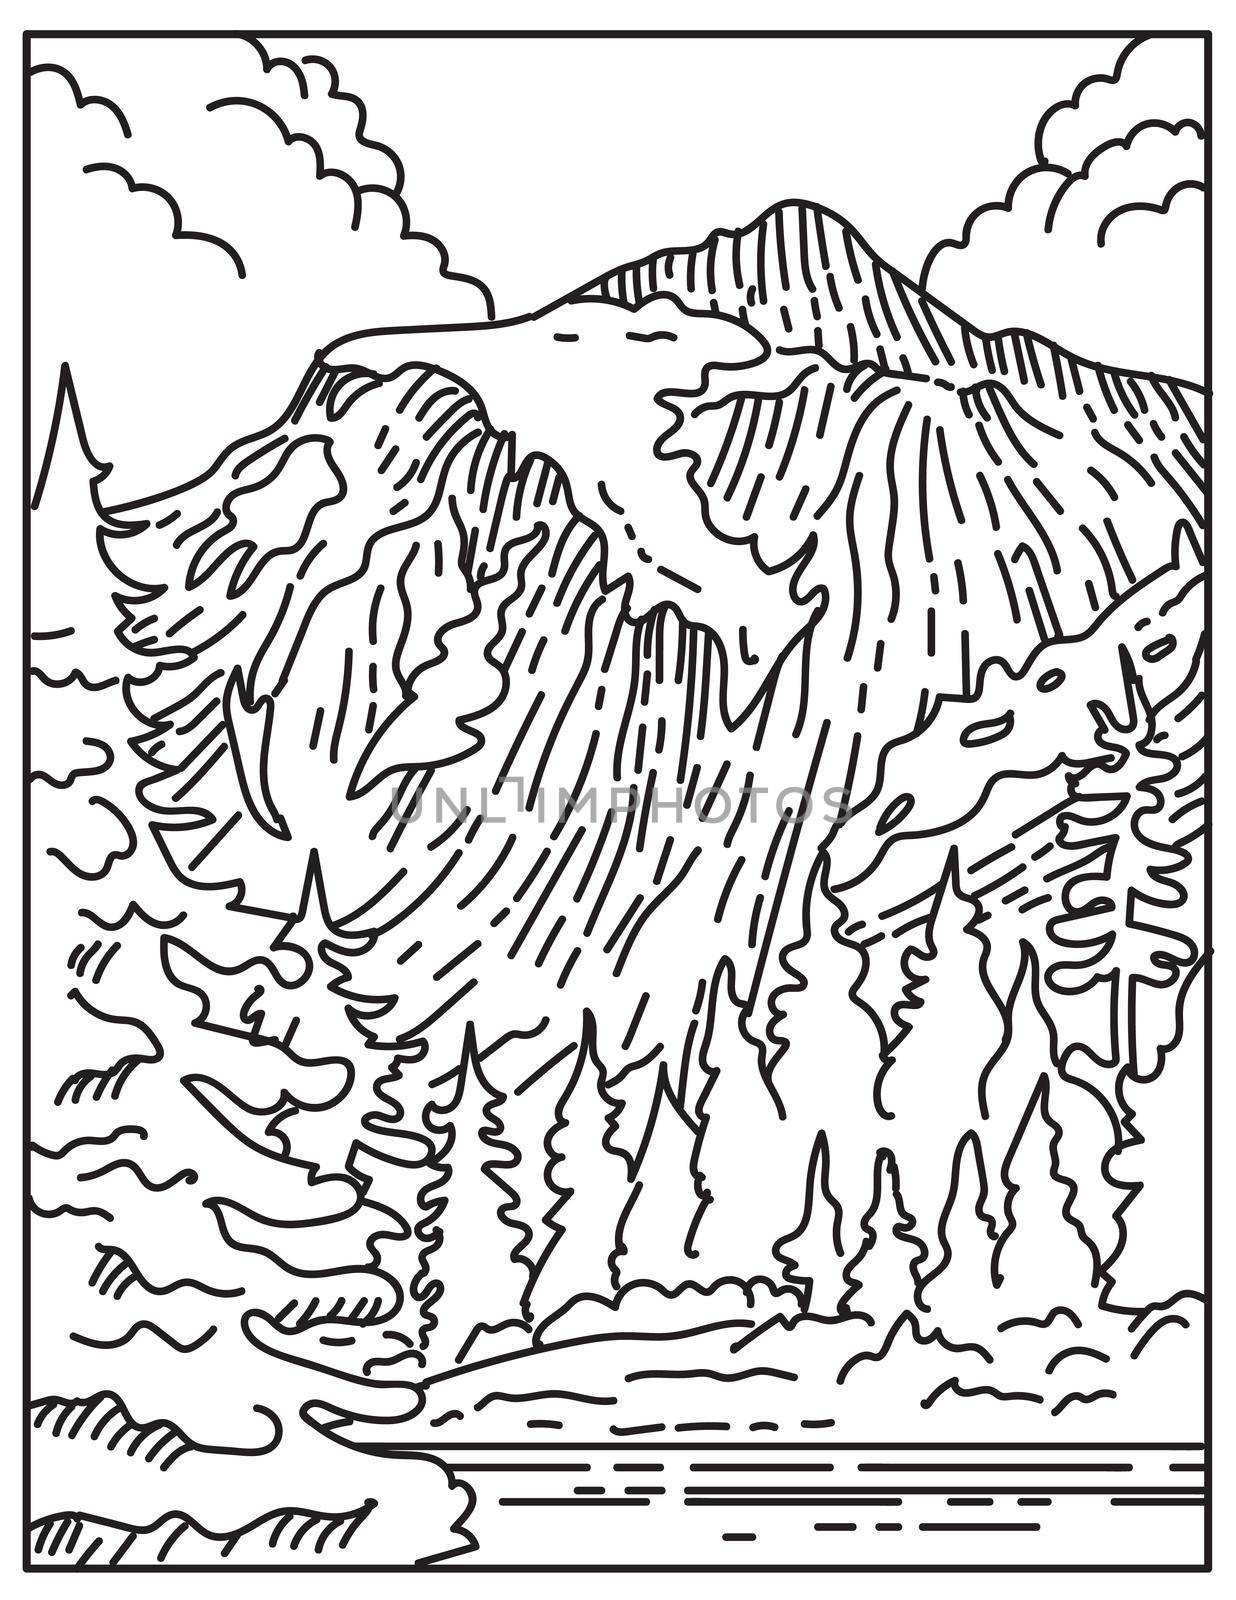 North Cascades National Park Located in Northern Washington State United States Mono Line or Monoline Black and White Line Art by patrimonio